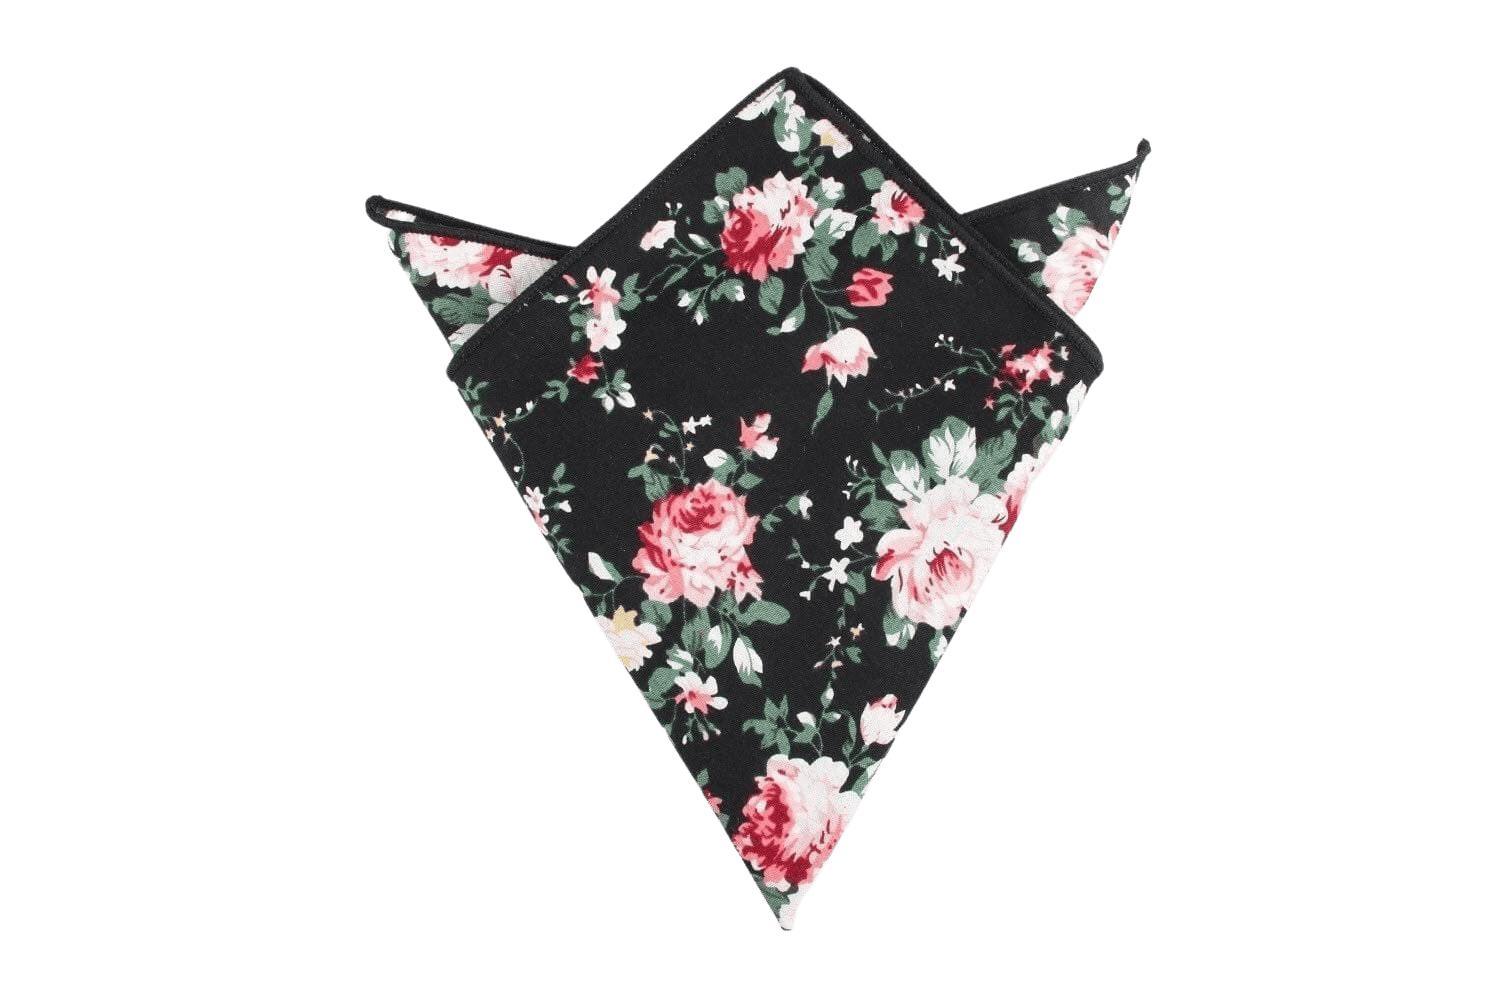 Black Floral Pocket Square DAN - MYTIESHOP Mytieshop Black Floral Pocket Square Color: BlackMaterial CottonItem Length: 23 cm ( 9 inches)Item Width : 22 cm (8.6 inches) Great for: Groom Groomsmen Wedding Shoots Formal Prom Fancy Parties Gifts and presents Black Floral print pocket square with pink and green flowers. looks excellent in wedding formats and works in any event, prom, missions, fancy events and more. hundreds of floral print designs in mytieshop. groom and groomsmen wedding attire an